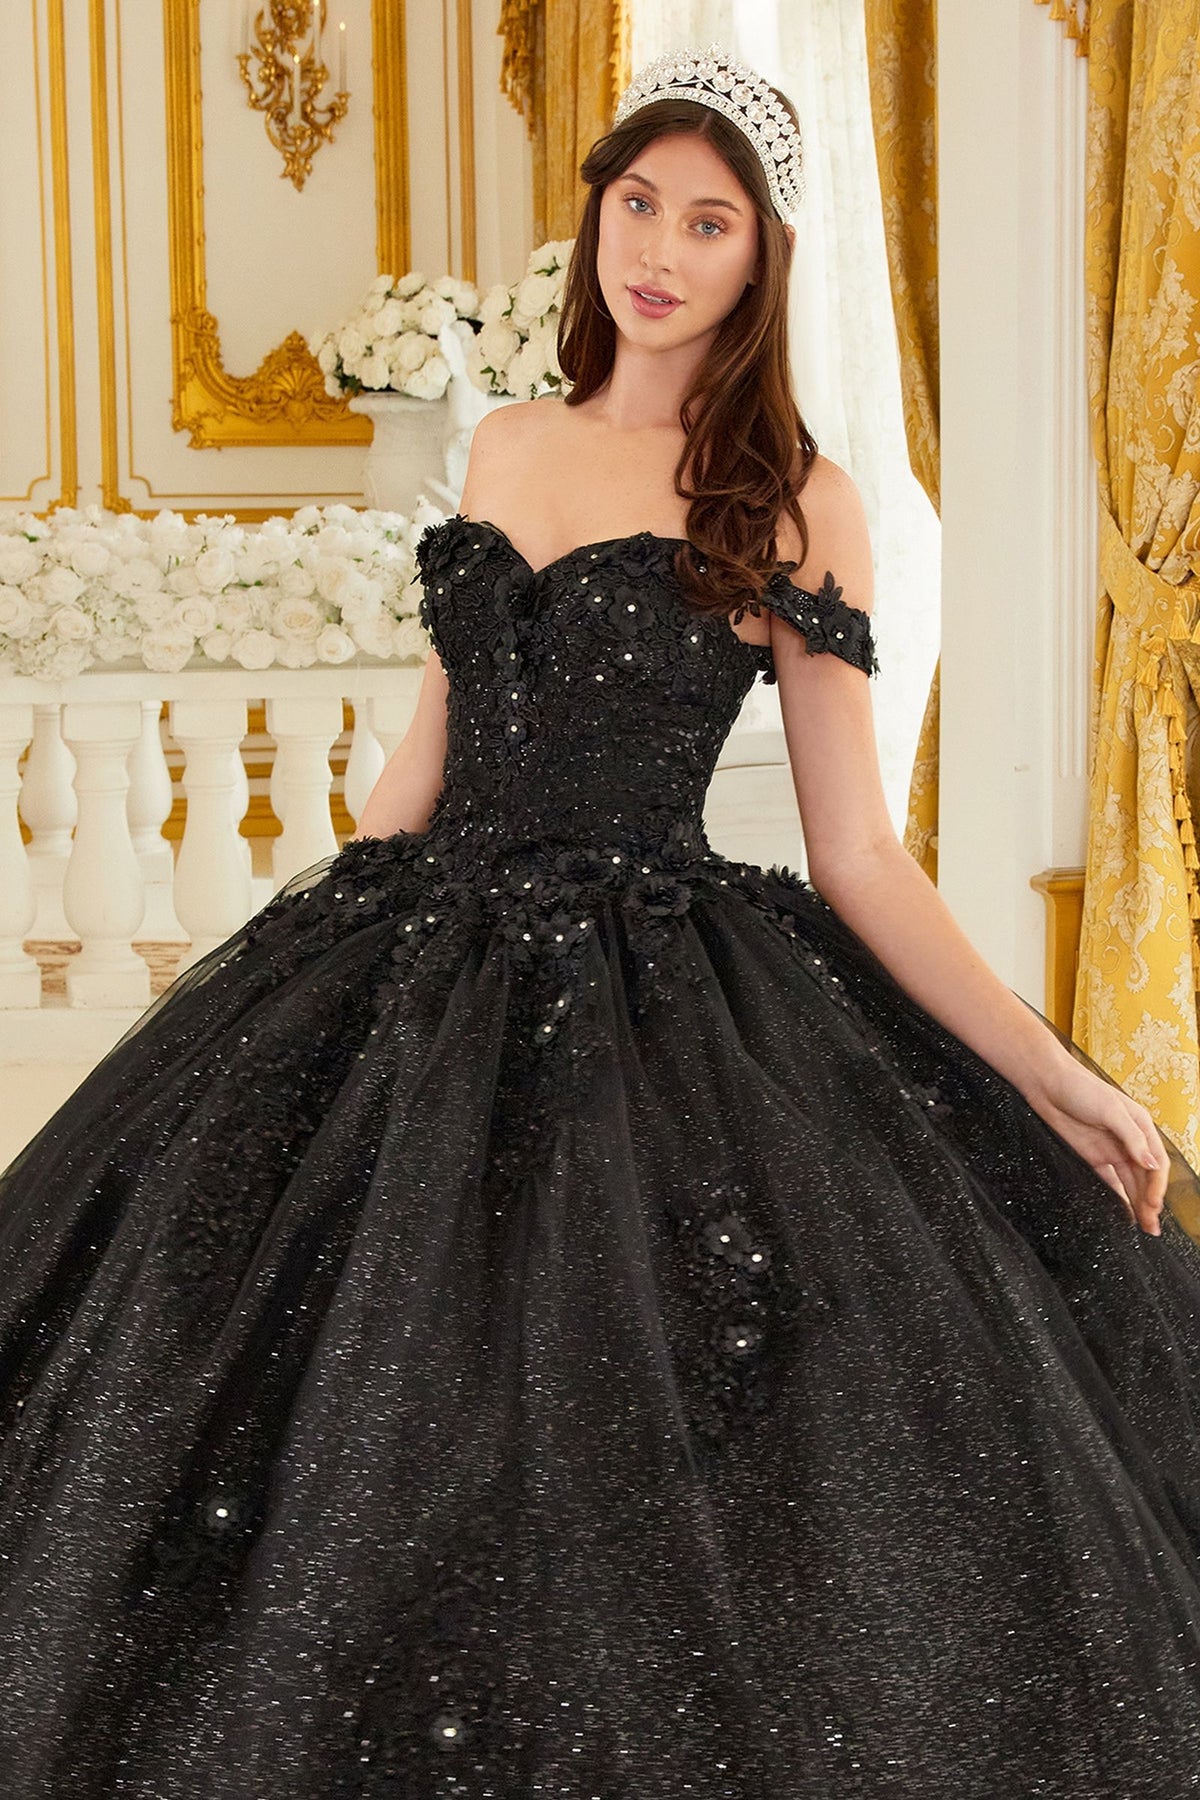 LaDivine by Cinderella Divine - Style 15702 - Off-the-Shoulder Floral Ball Gown, A-Line Silhouette, Sweetheart Bodice, Cap Sleeves, Beaded 3D Floral Appliques. Available at Madeline's Boutique In Boca Raton, Florida.  Picture is of the dress in black.